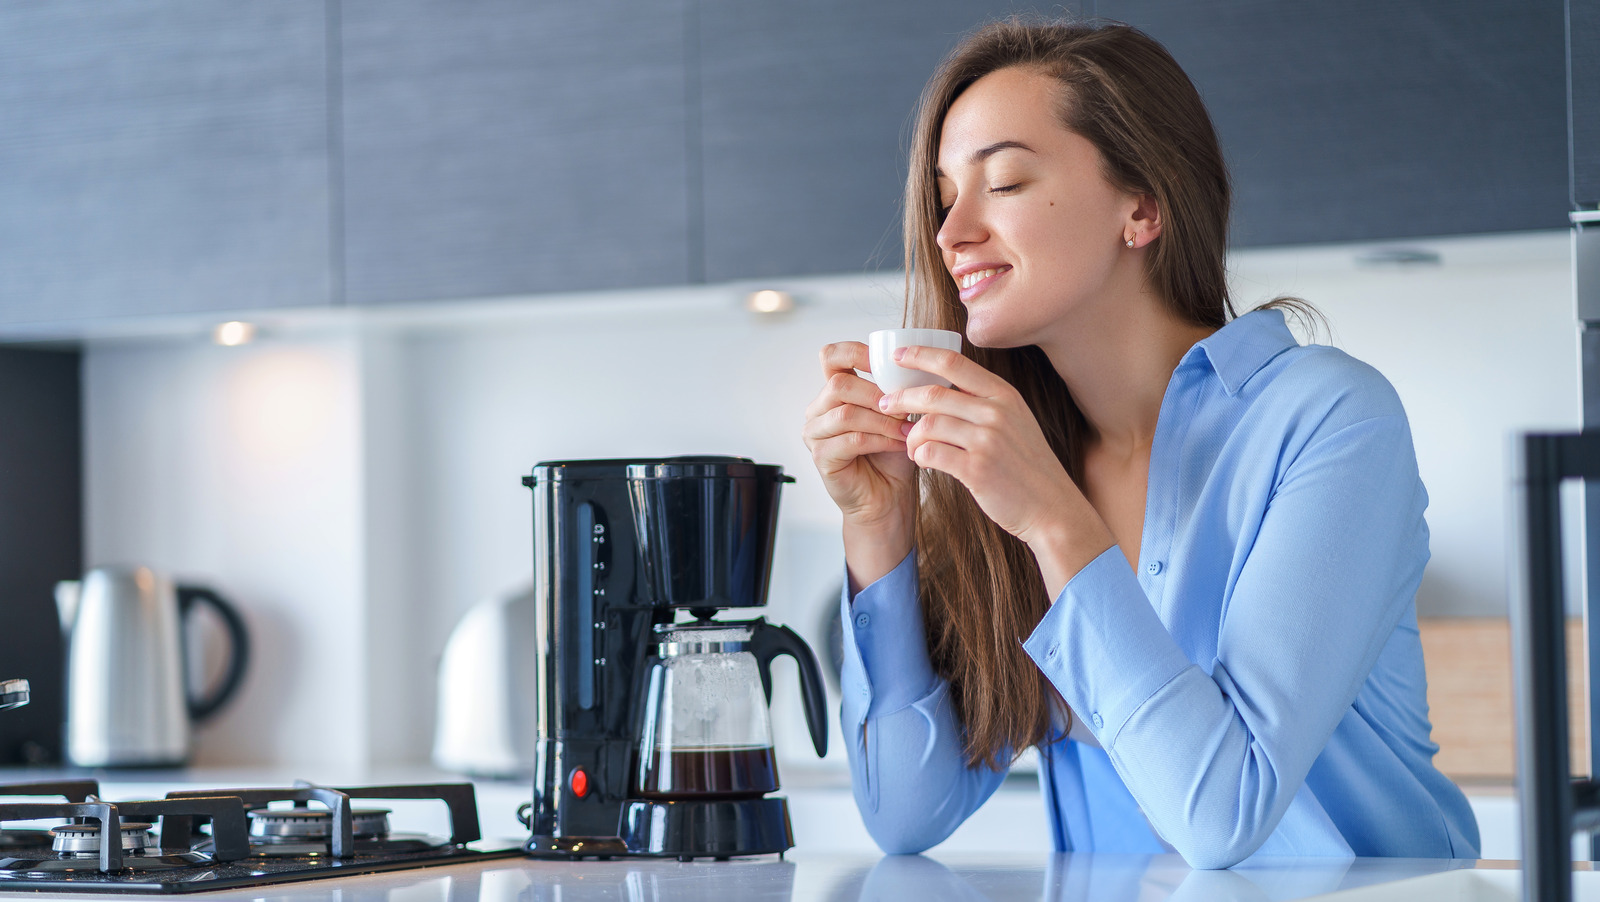 5 Ways to Clean Your Coffee Maker: A Cleaning Expert's Methods